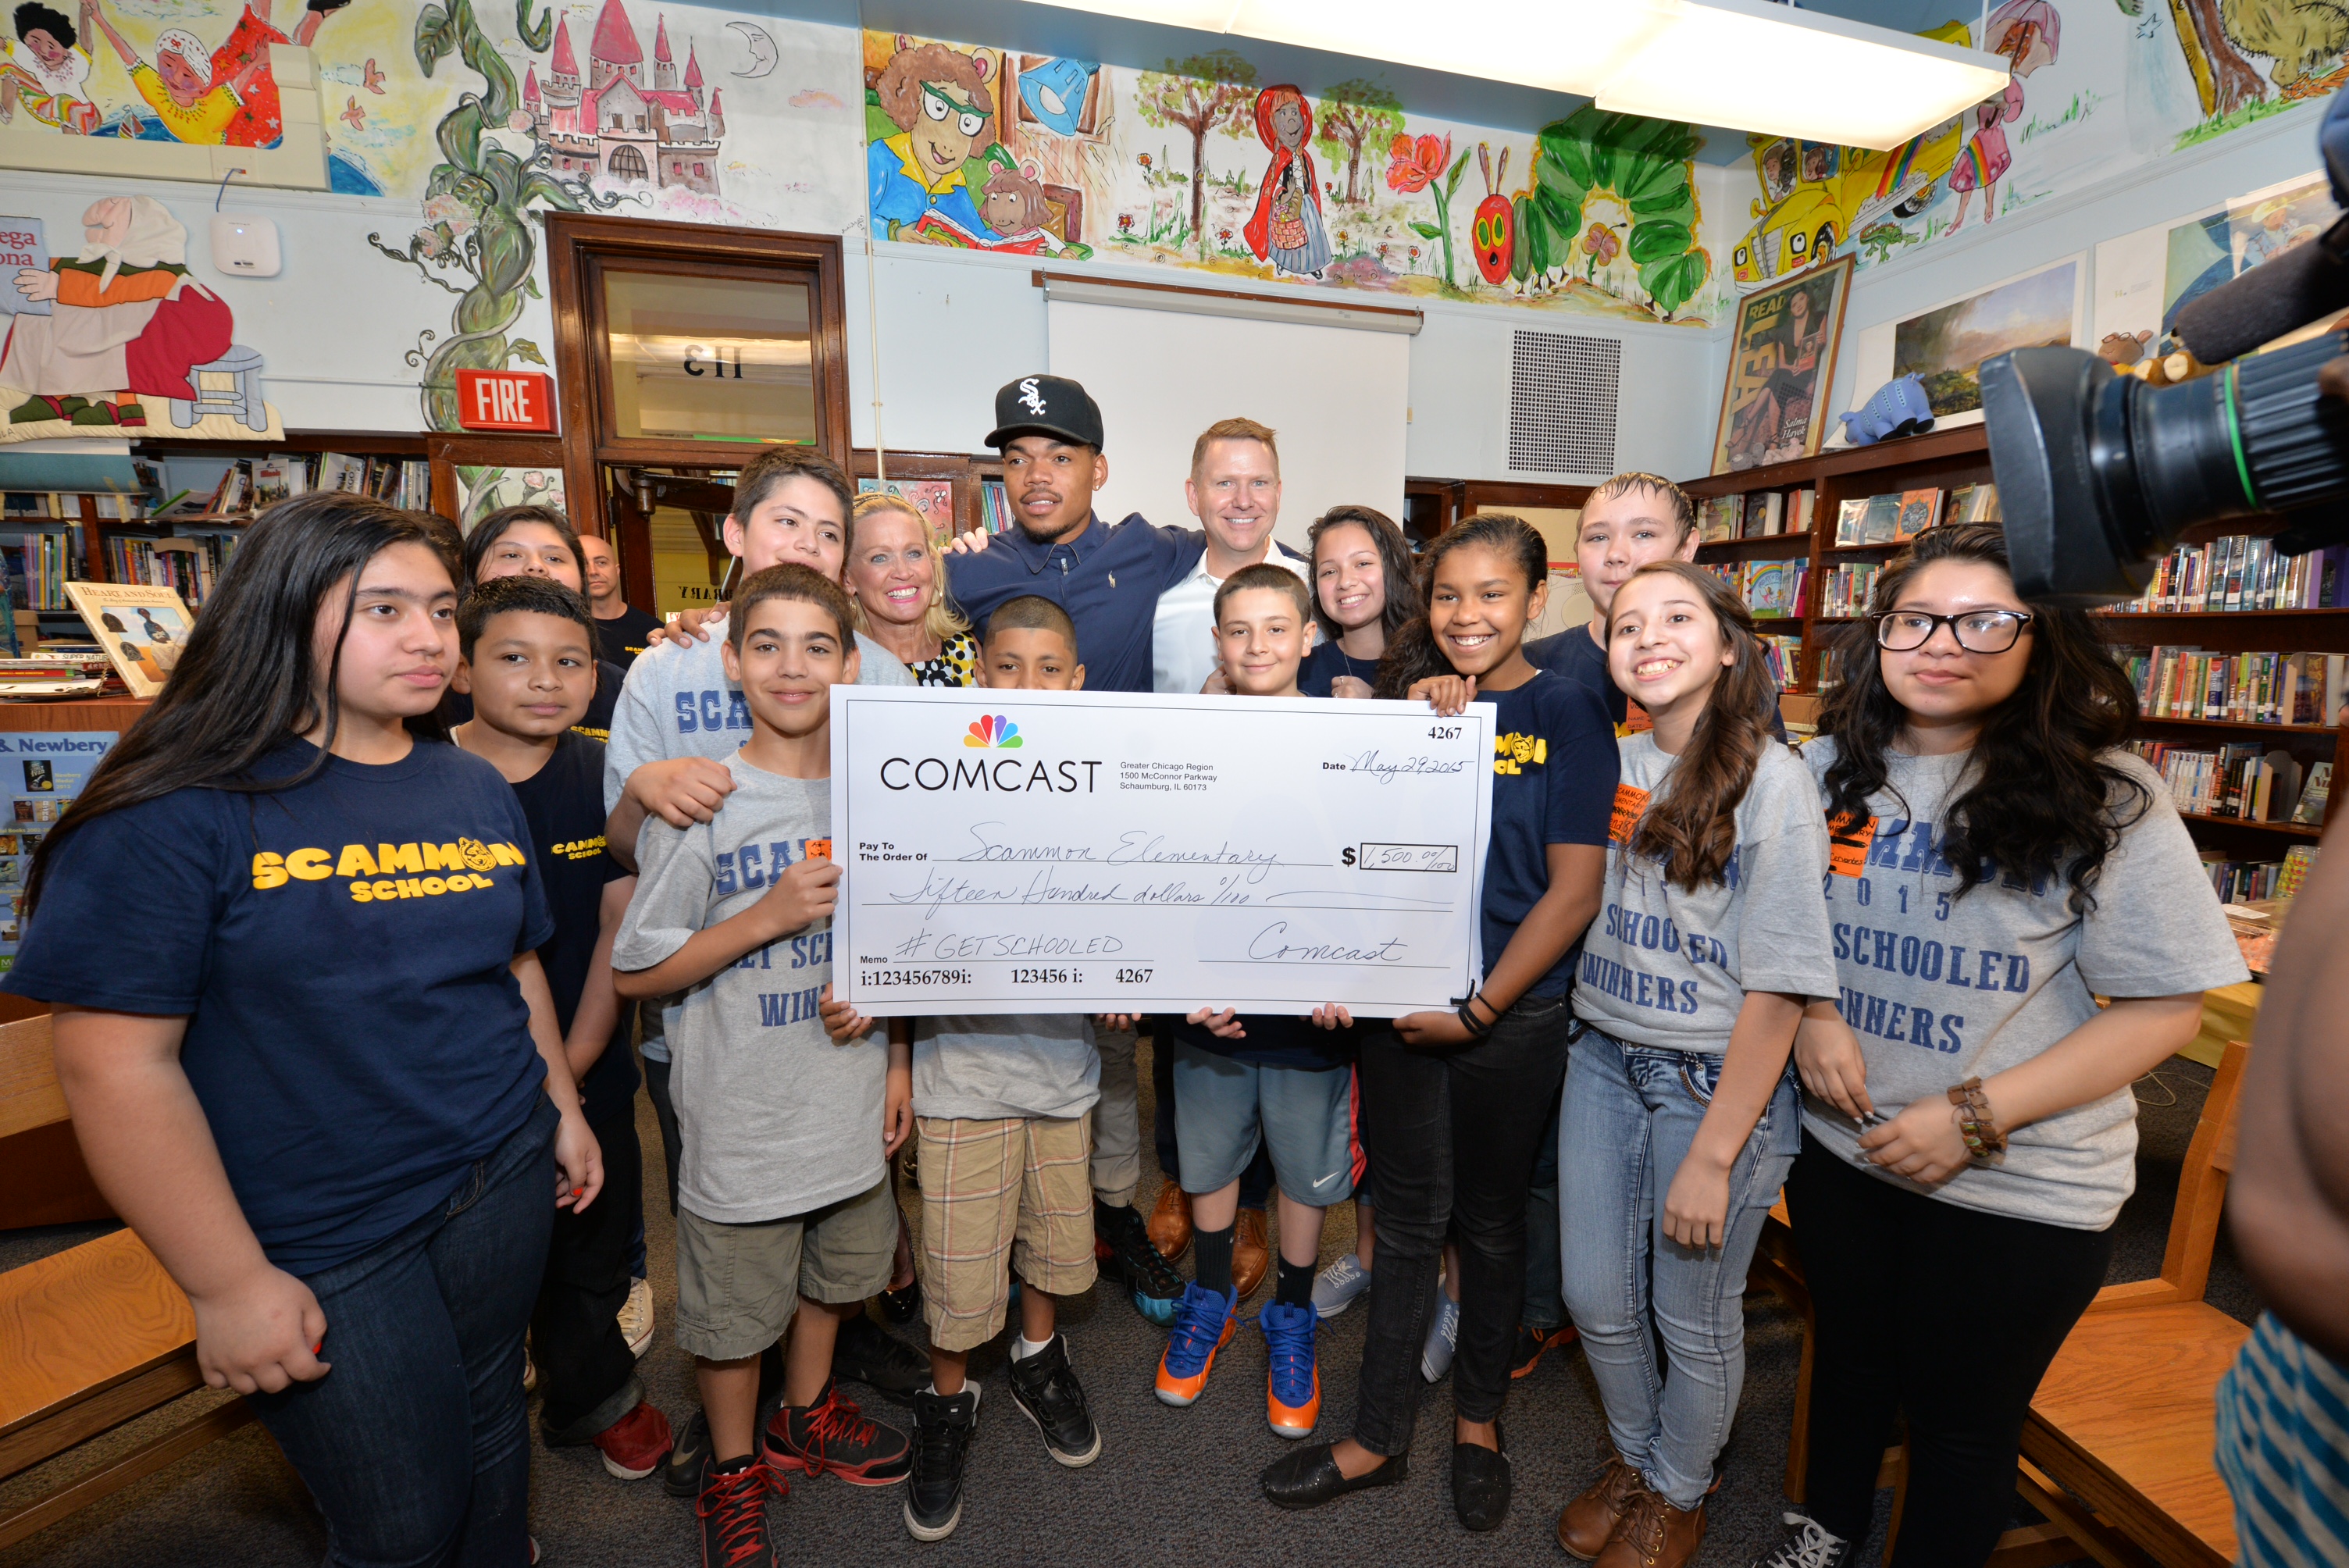 Chance the Rapper joins Comcast's Joe Higgins to recognize  Chicago's Scammon Elementary for tying for first place in the "Get Schooled, Get Connected" Spring Challenge.